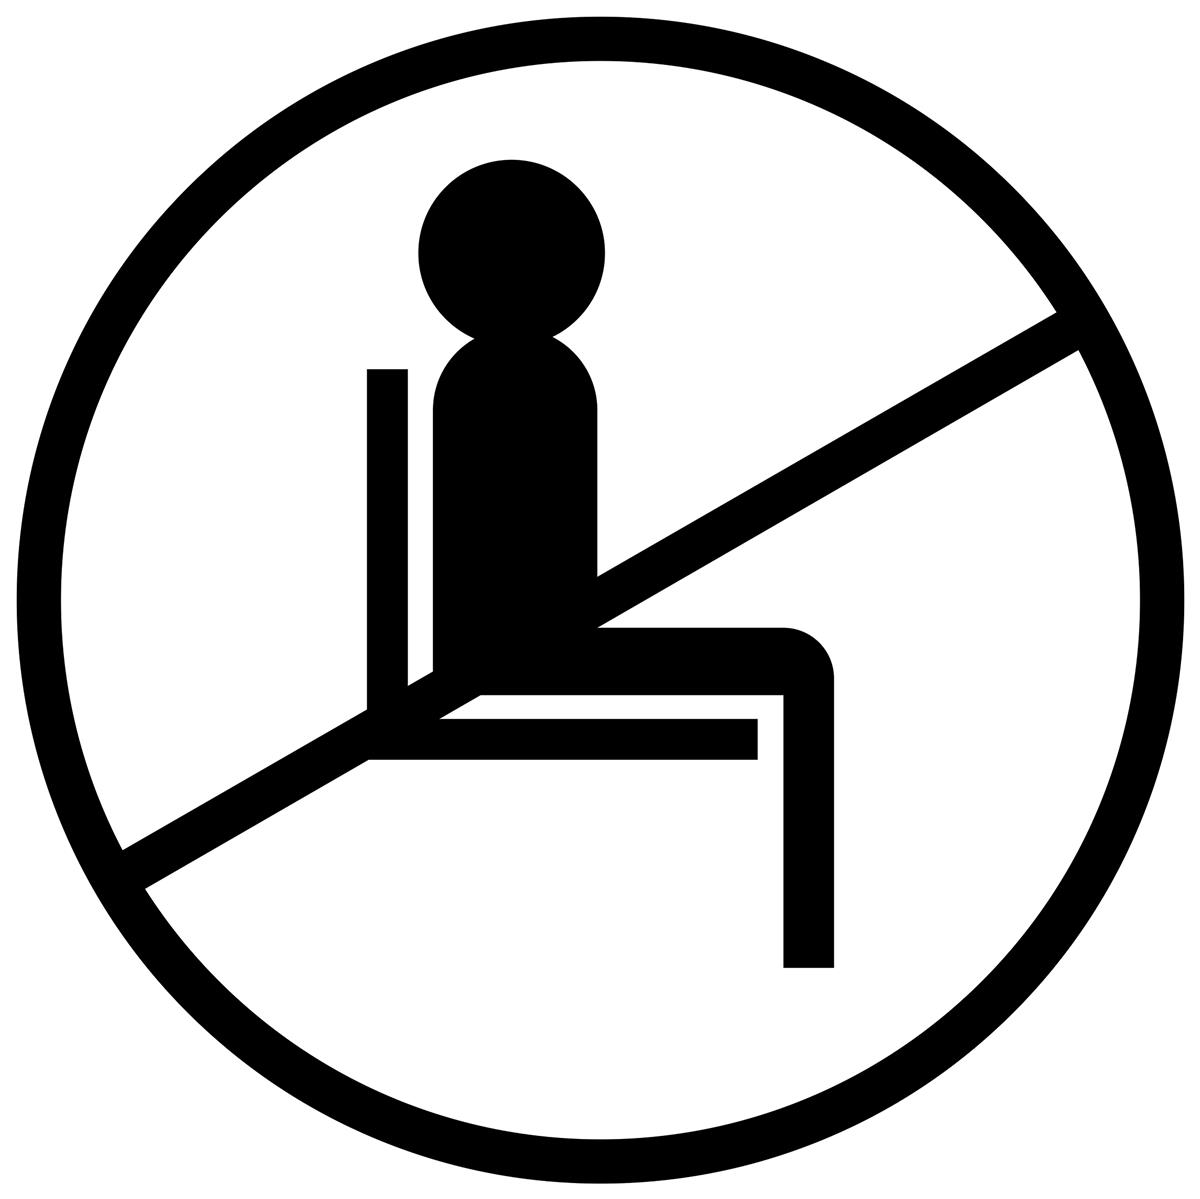 White do not use seating sticker with removable self-adhesive backing